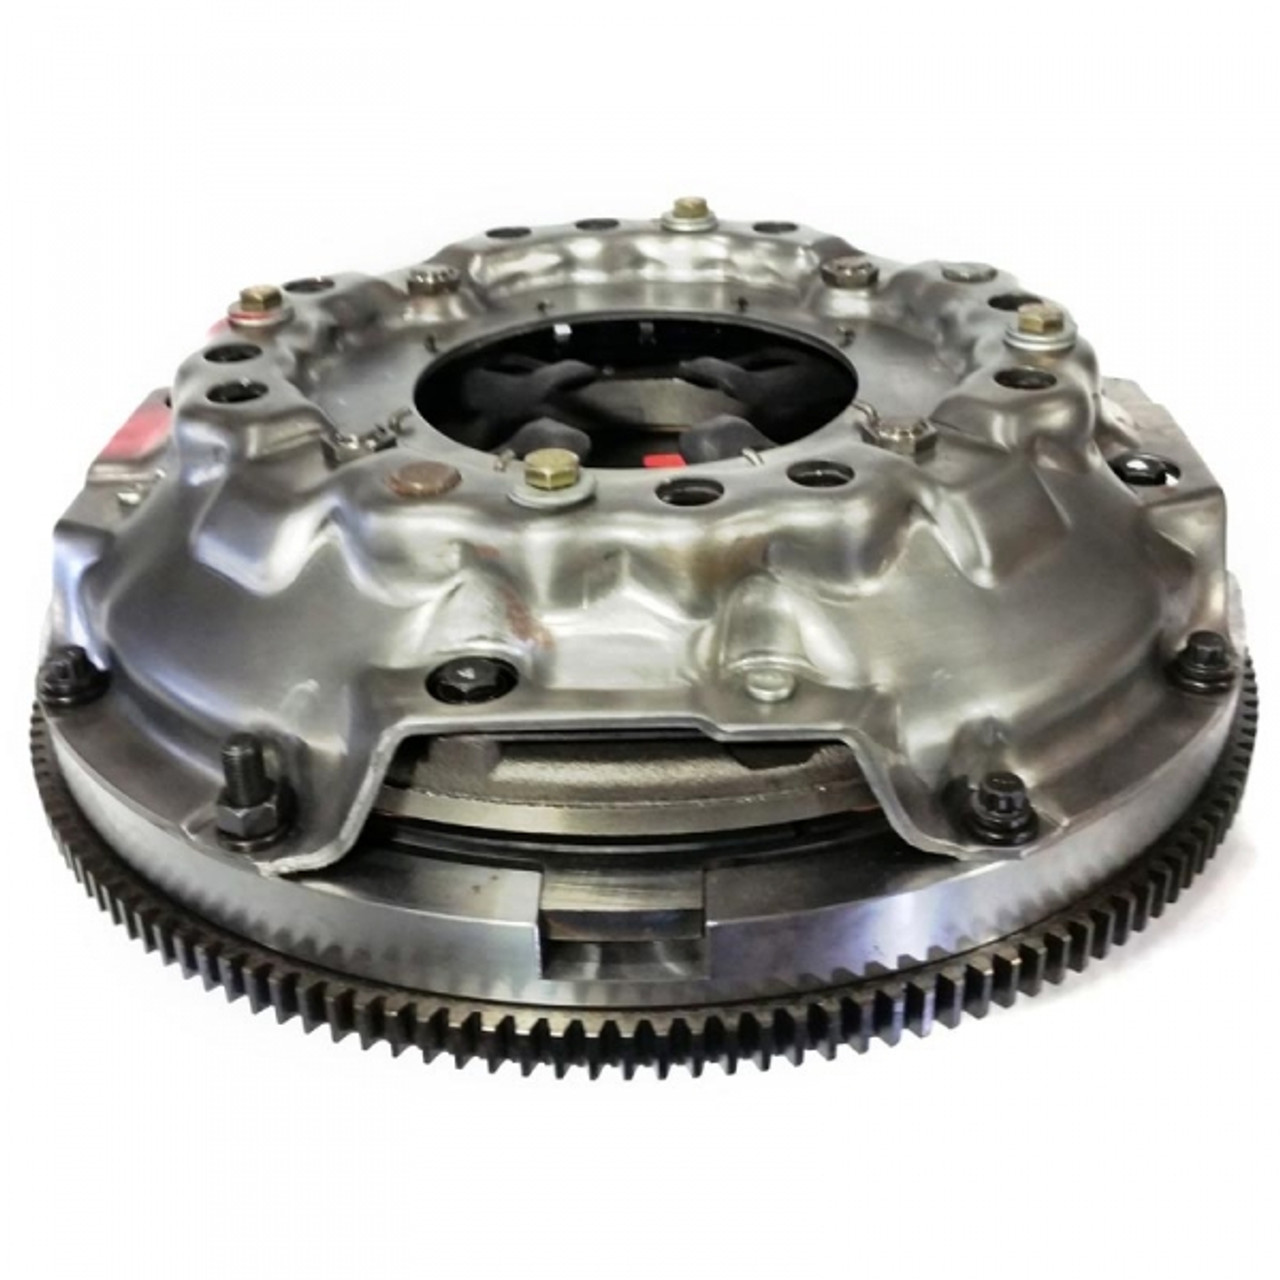 VALAIR COMPETITION SINTERED IRON DUAL DISC CLUTCH 2005.5-2018 DODGE RAM 5.9L/6.7L CUMMINS 6-SPEED (UP TO 800HP)View